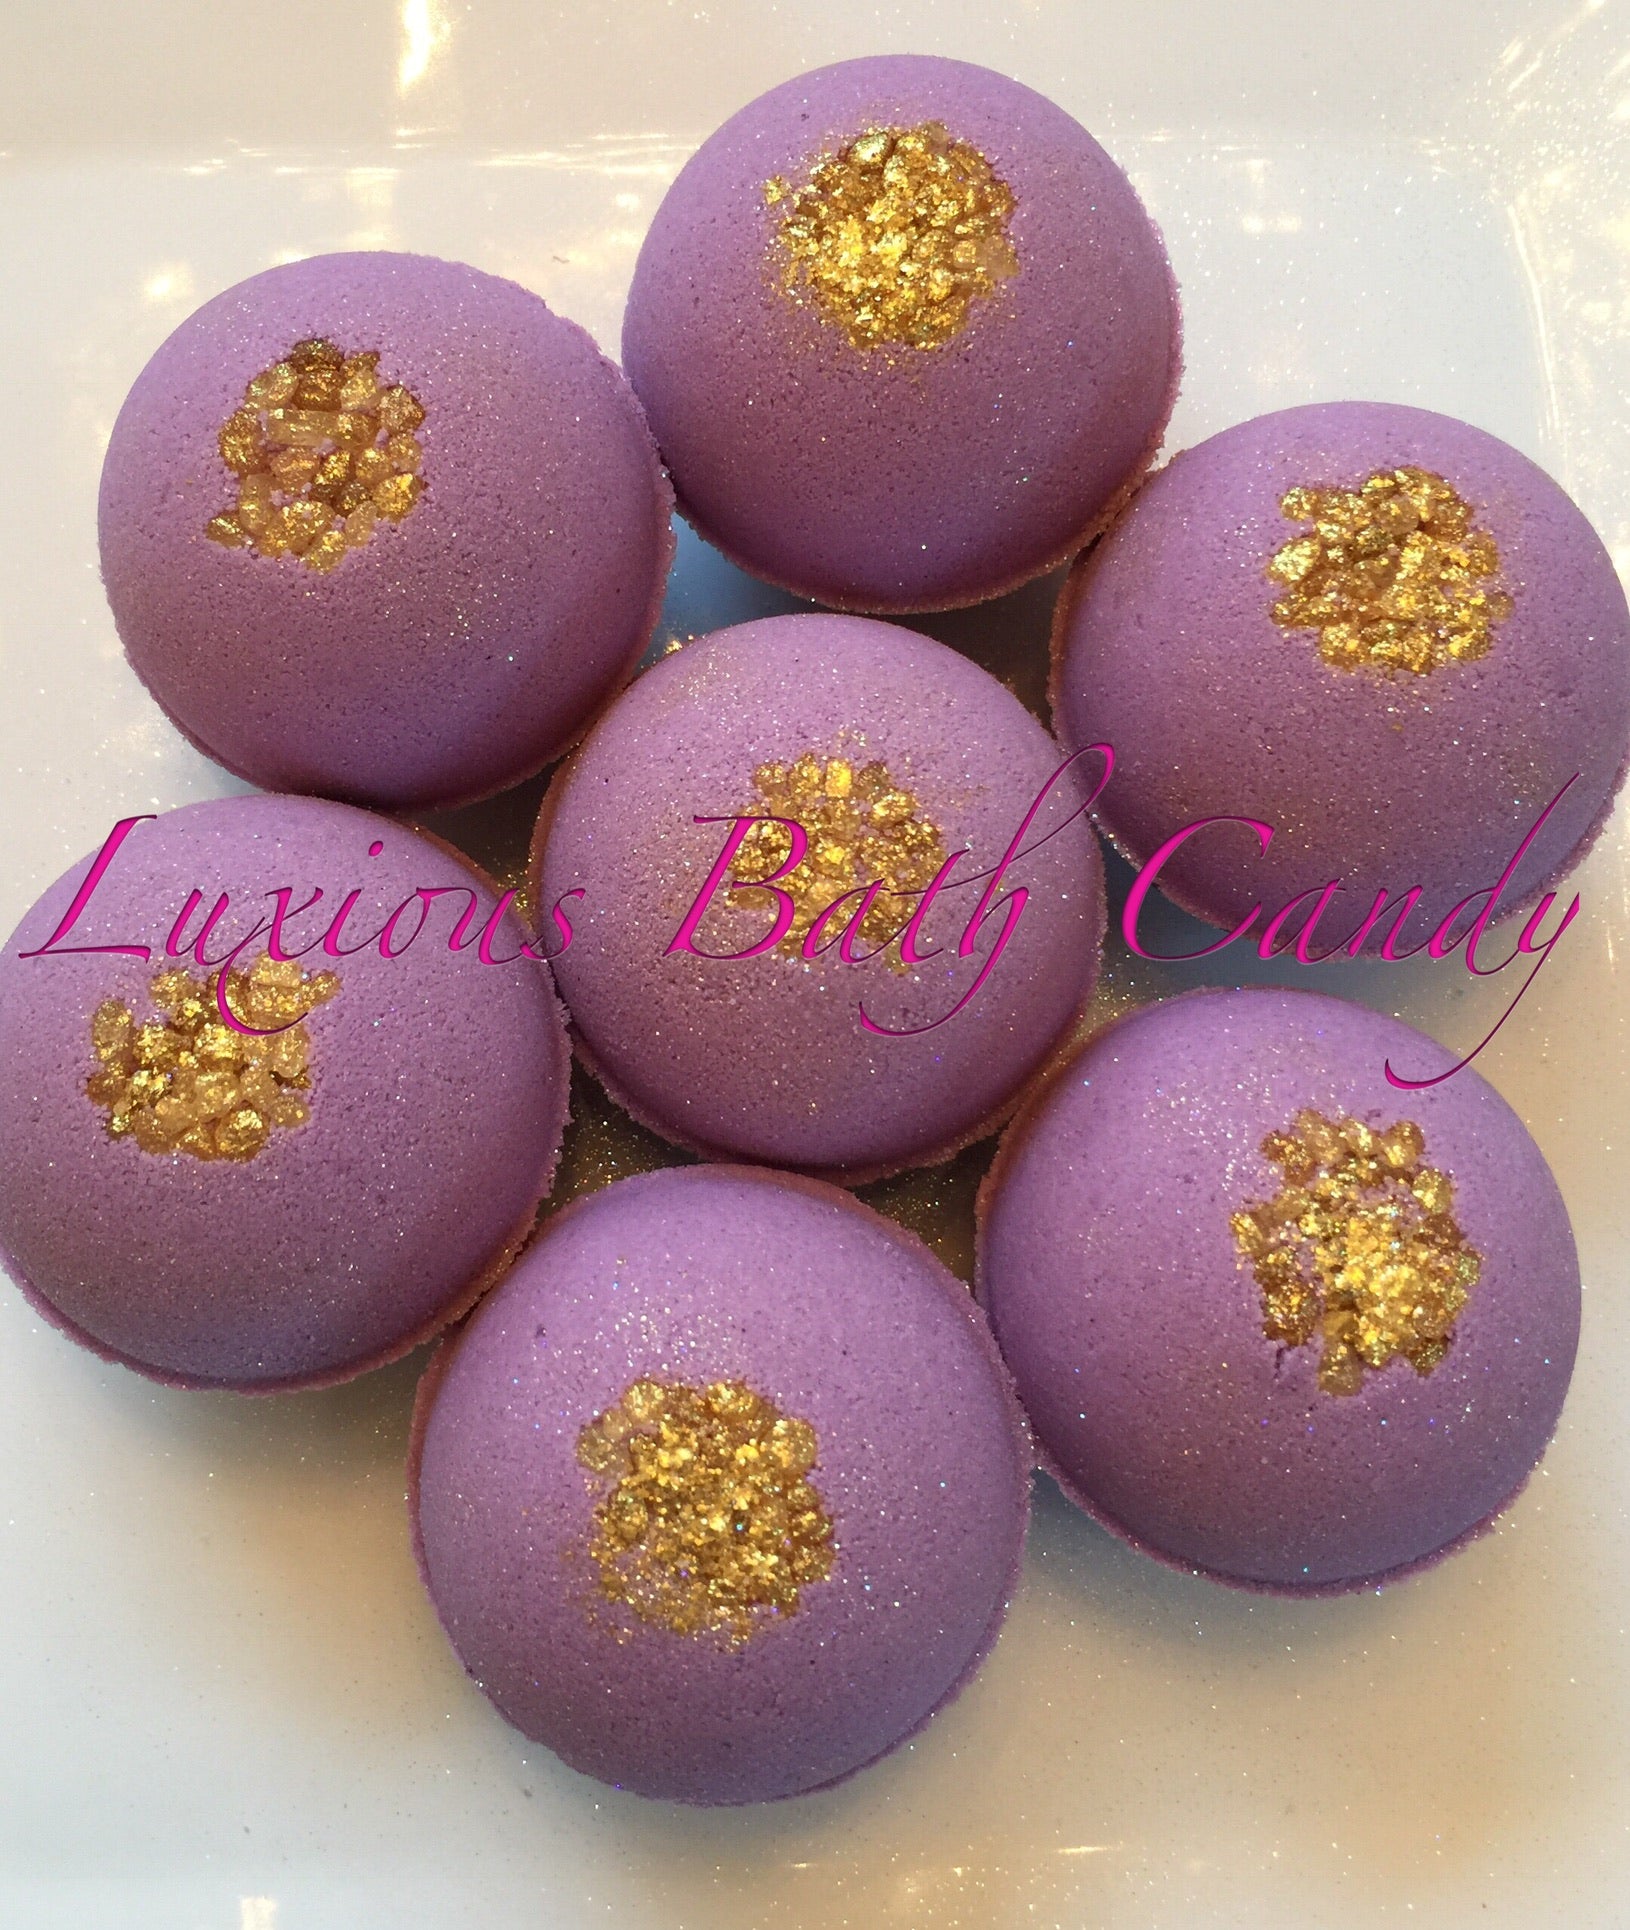 Luxious Bath Candy - Inspiring Your Vibe